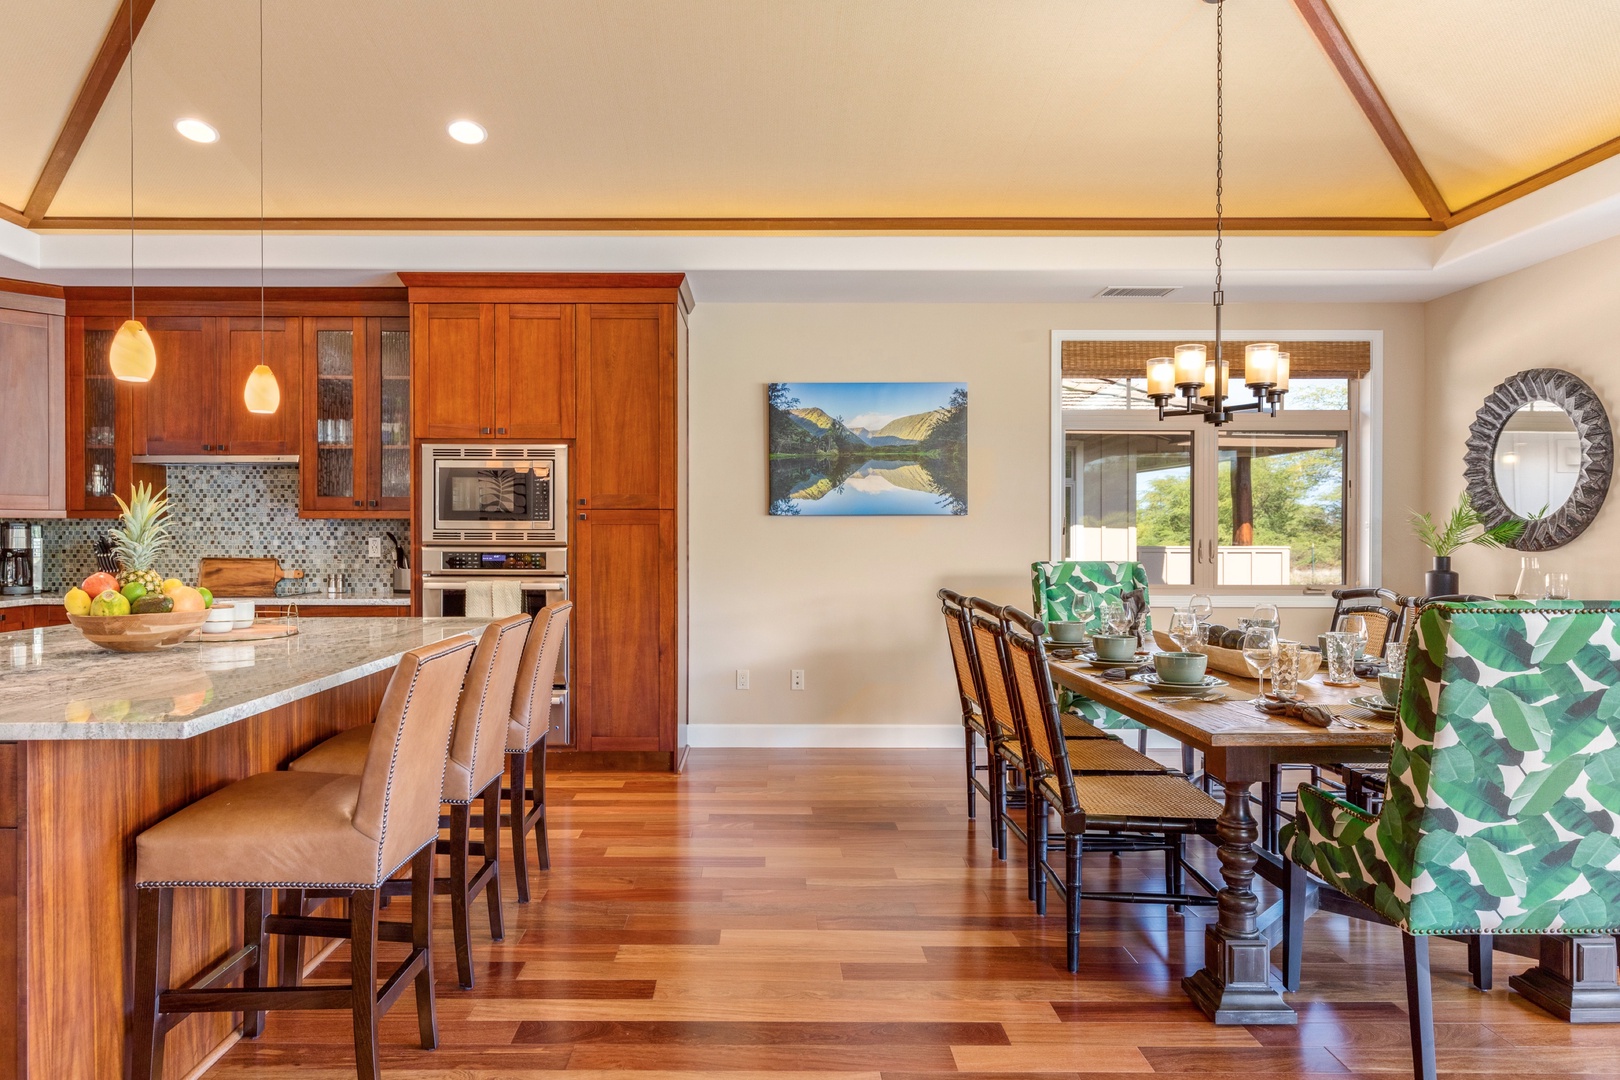 Kamuela Vacation Rentals, 3BD KaMilo (349) Home at Mauna Lani Resort - Breakfast bar and dining table for eight framed by soaring vaulted ceilings.